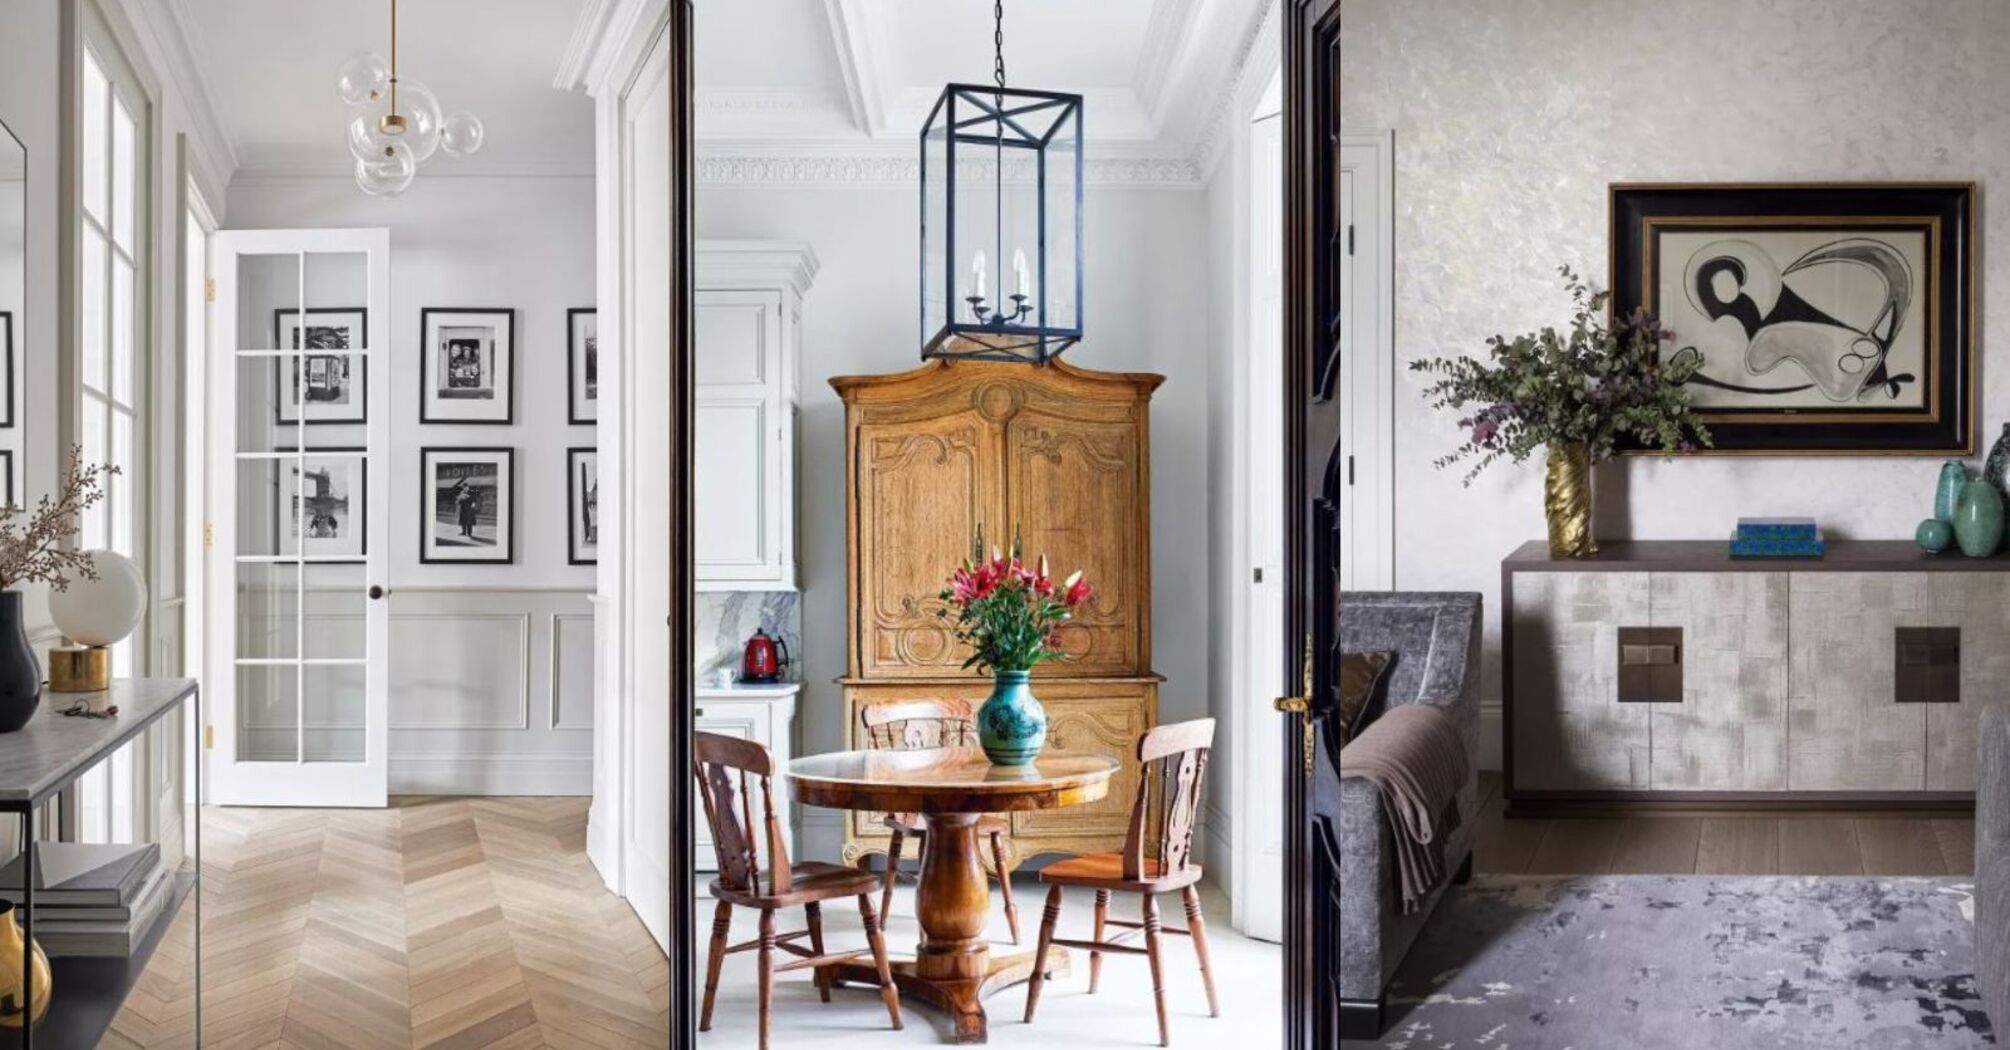 How to make the interior visually more expensive